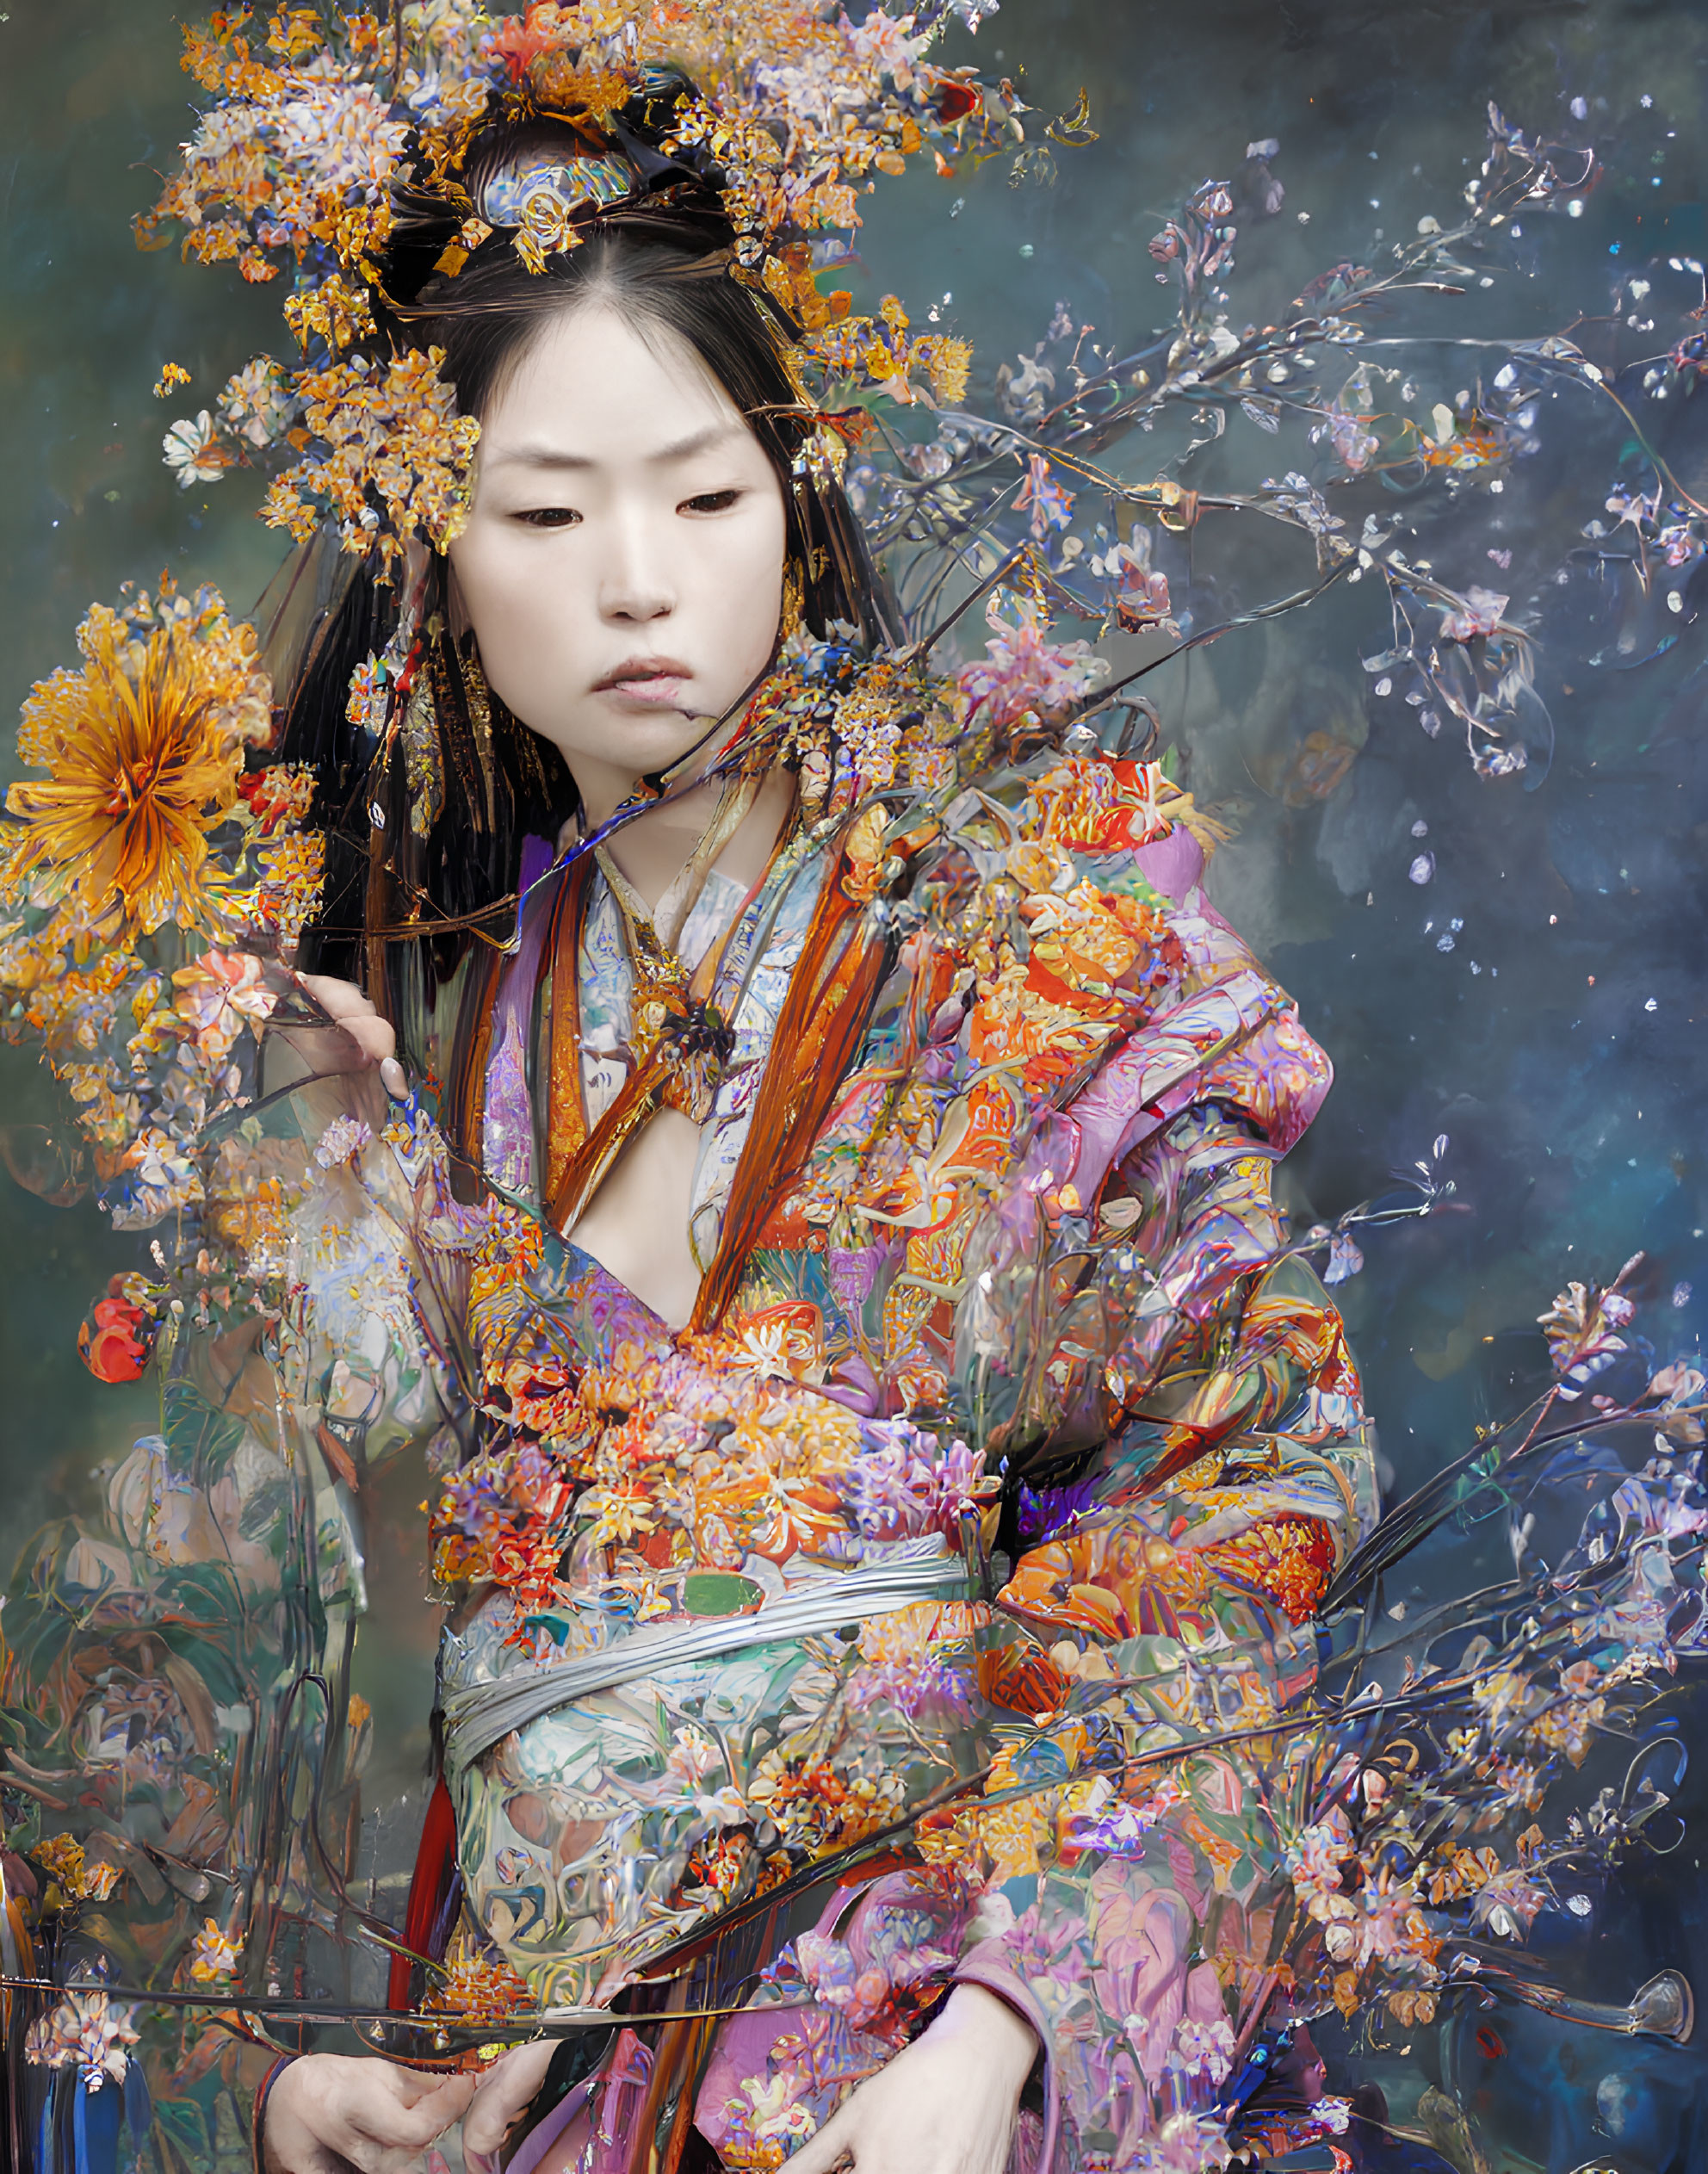 Person in vibrant floral kimono and headdress surrounded by blossoms on muted backdrop